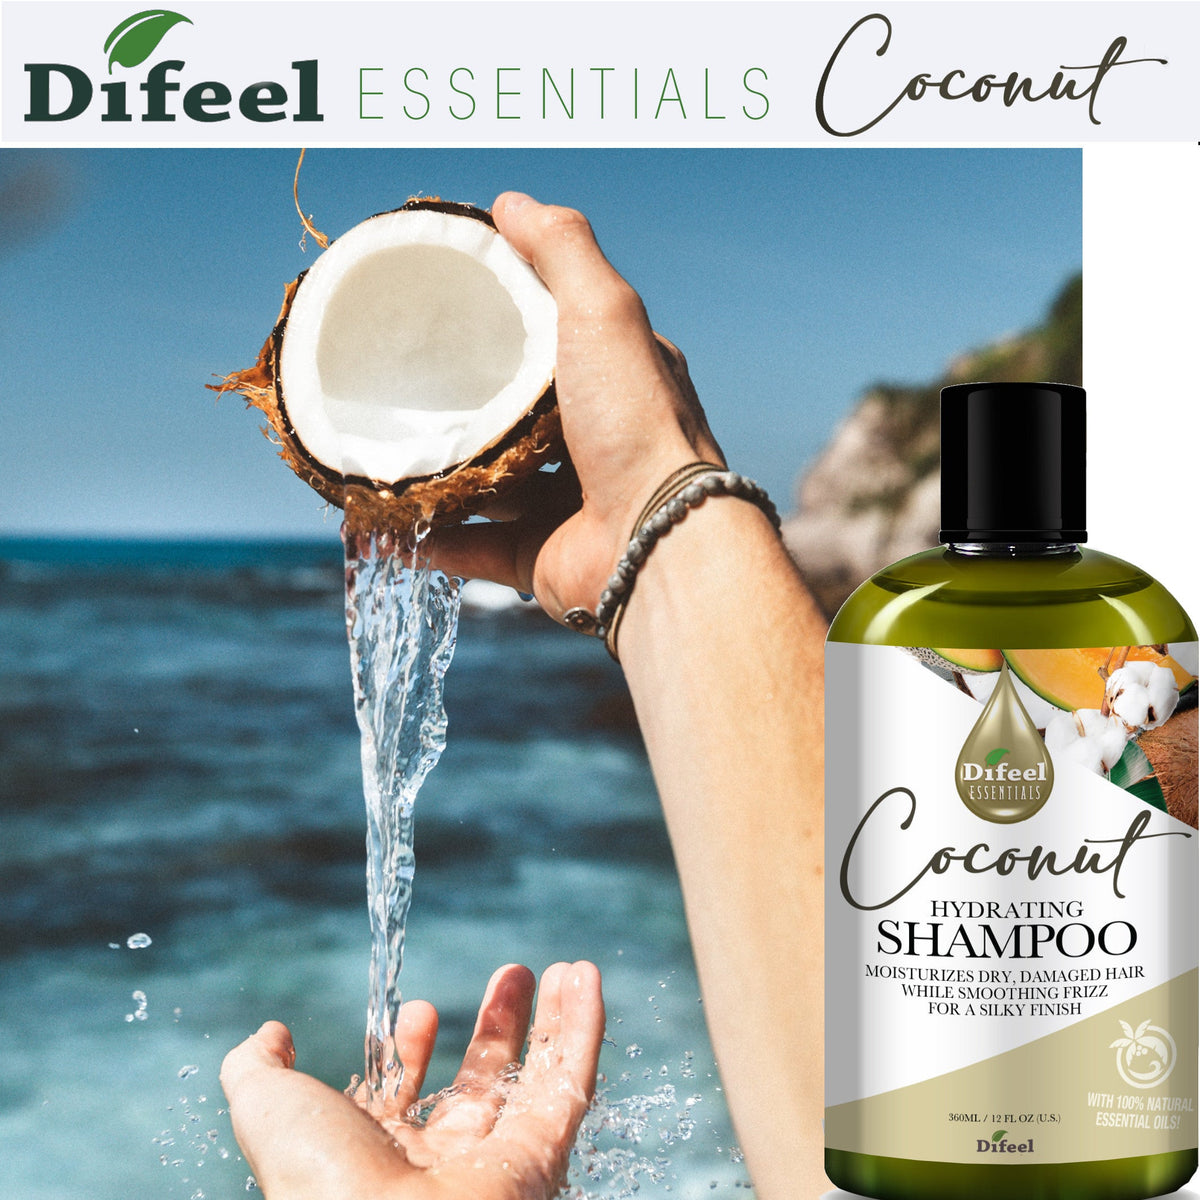 Difeel Essentials Hydrating Coconut - Shampoo 12 oz. by difeel - find your natural beauty